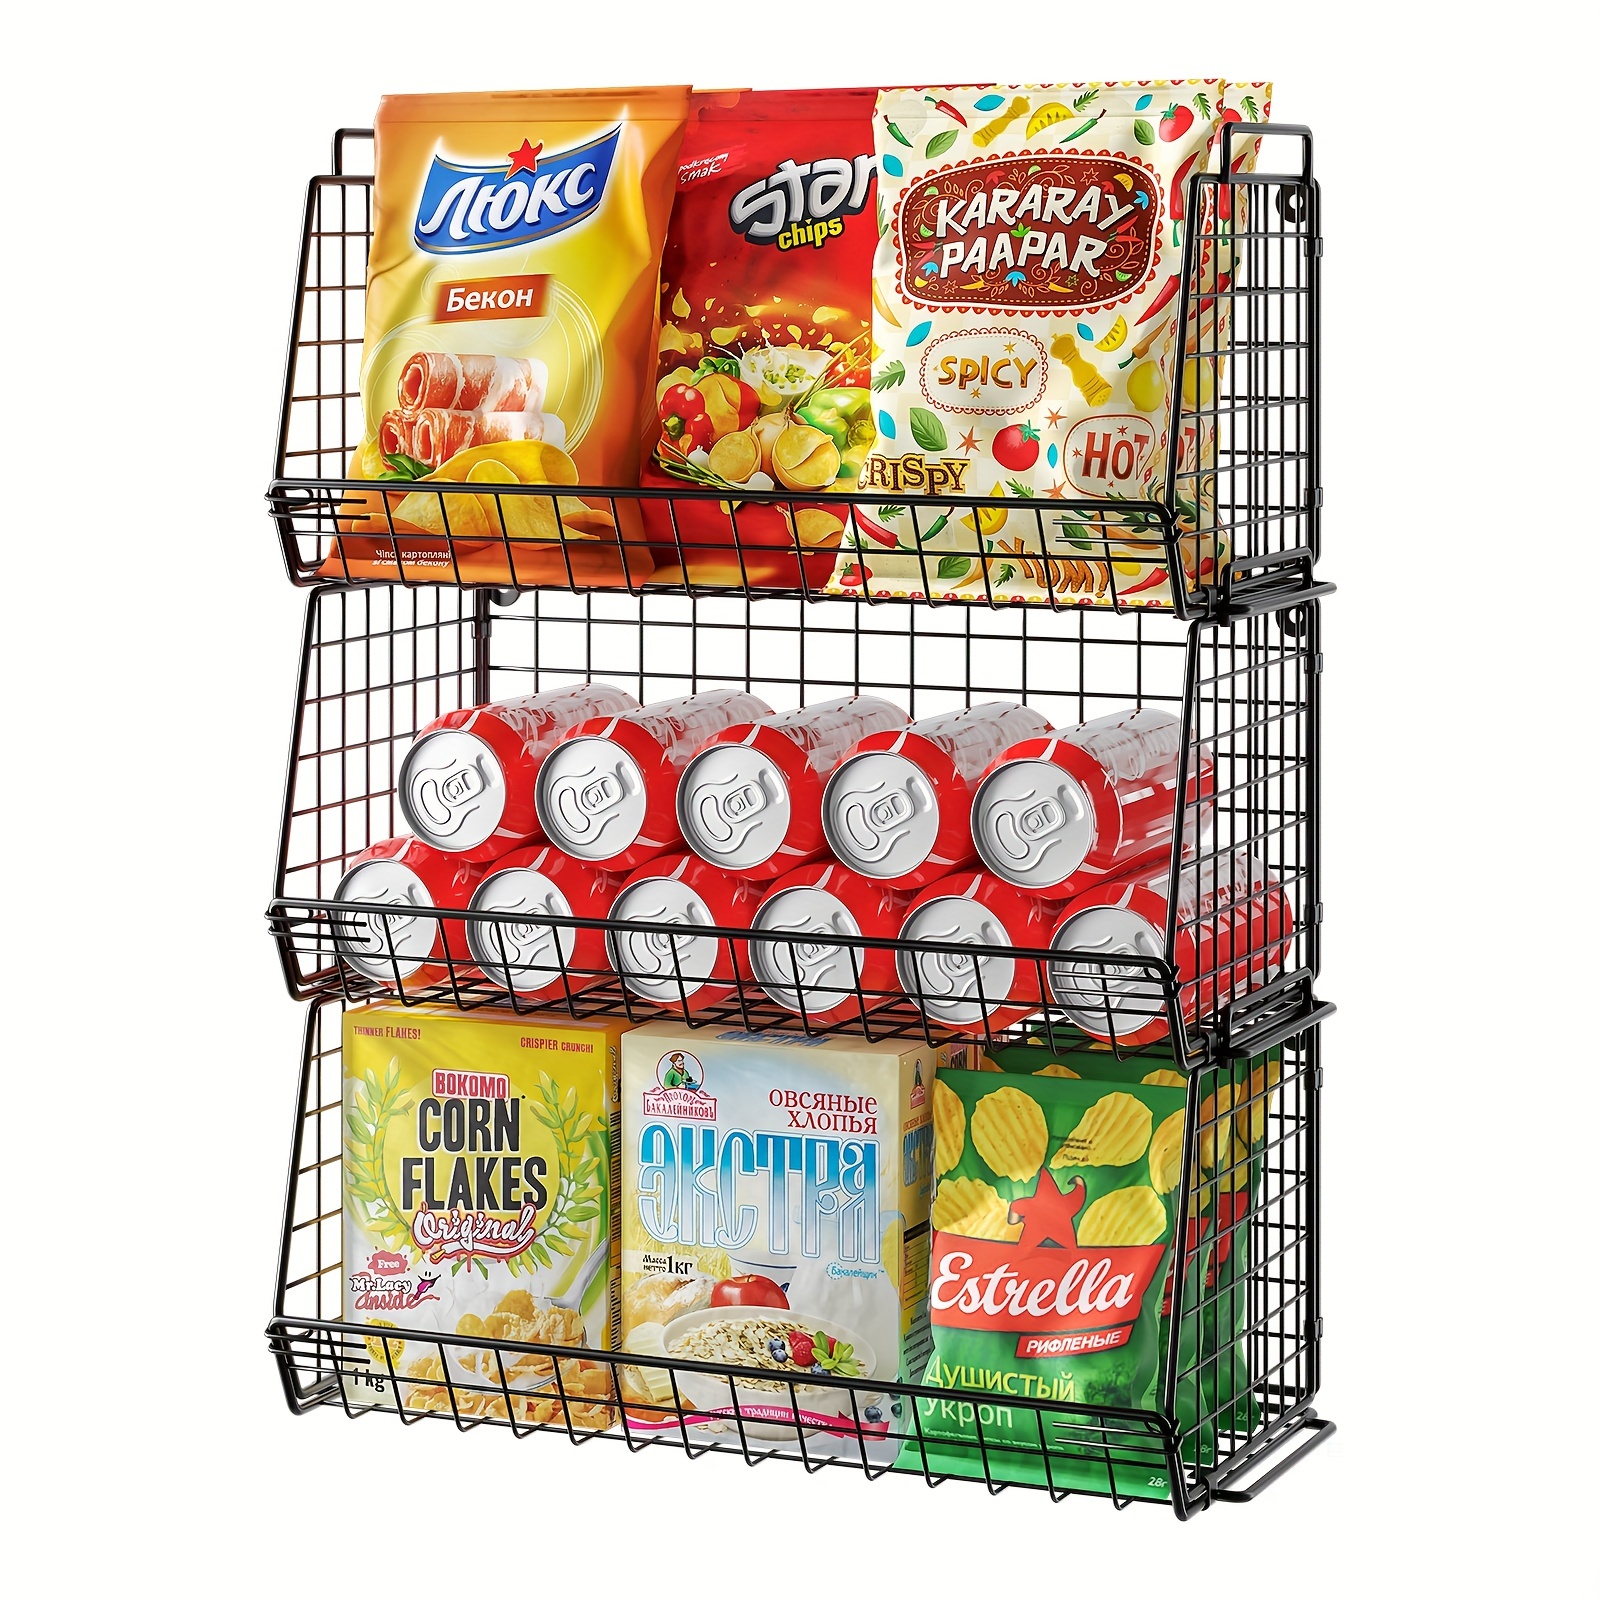 

1pc 3 Tier Stackable Snack Organizer Wall Mount Hanging Pantry Household Food Storage Basket With Handles Foldable Snack Rack Stand For Countertop Cabinets Kitchen